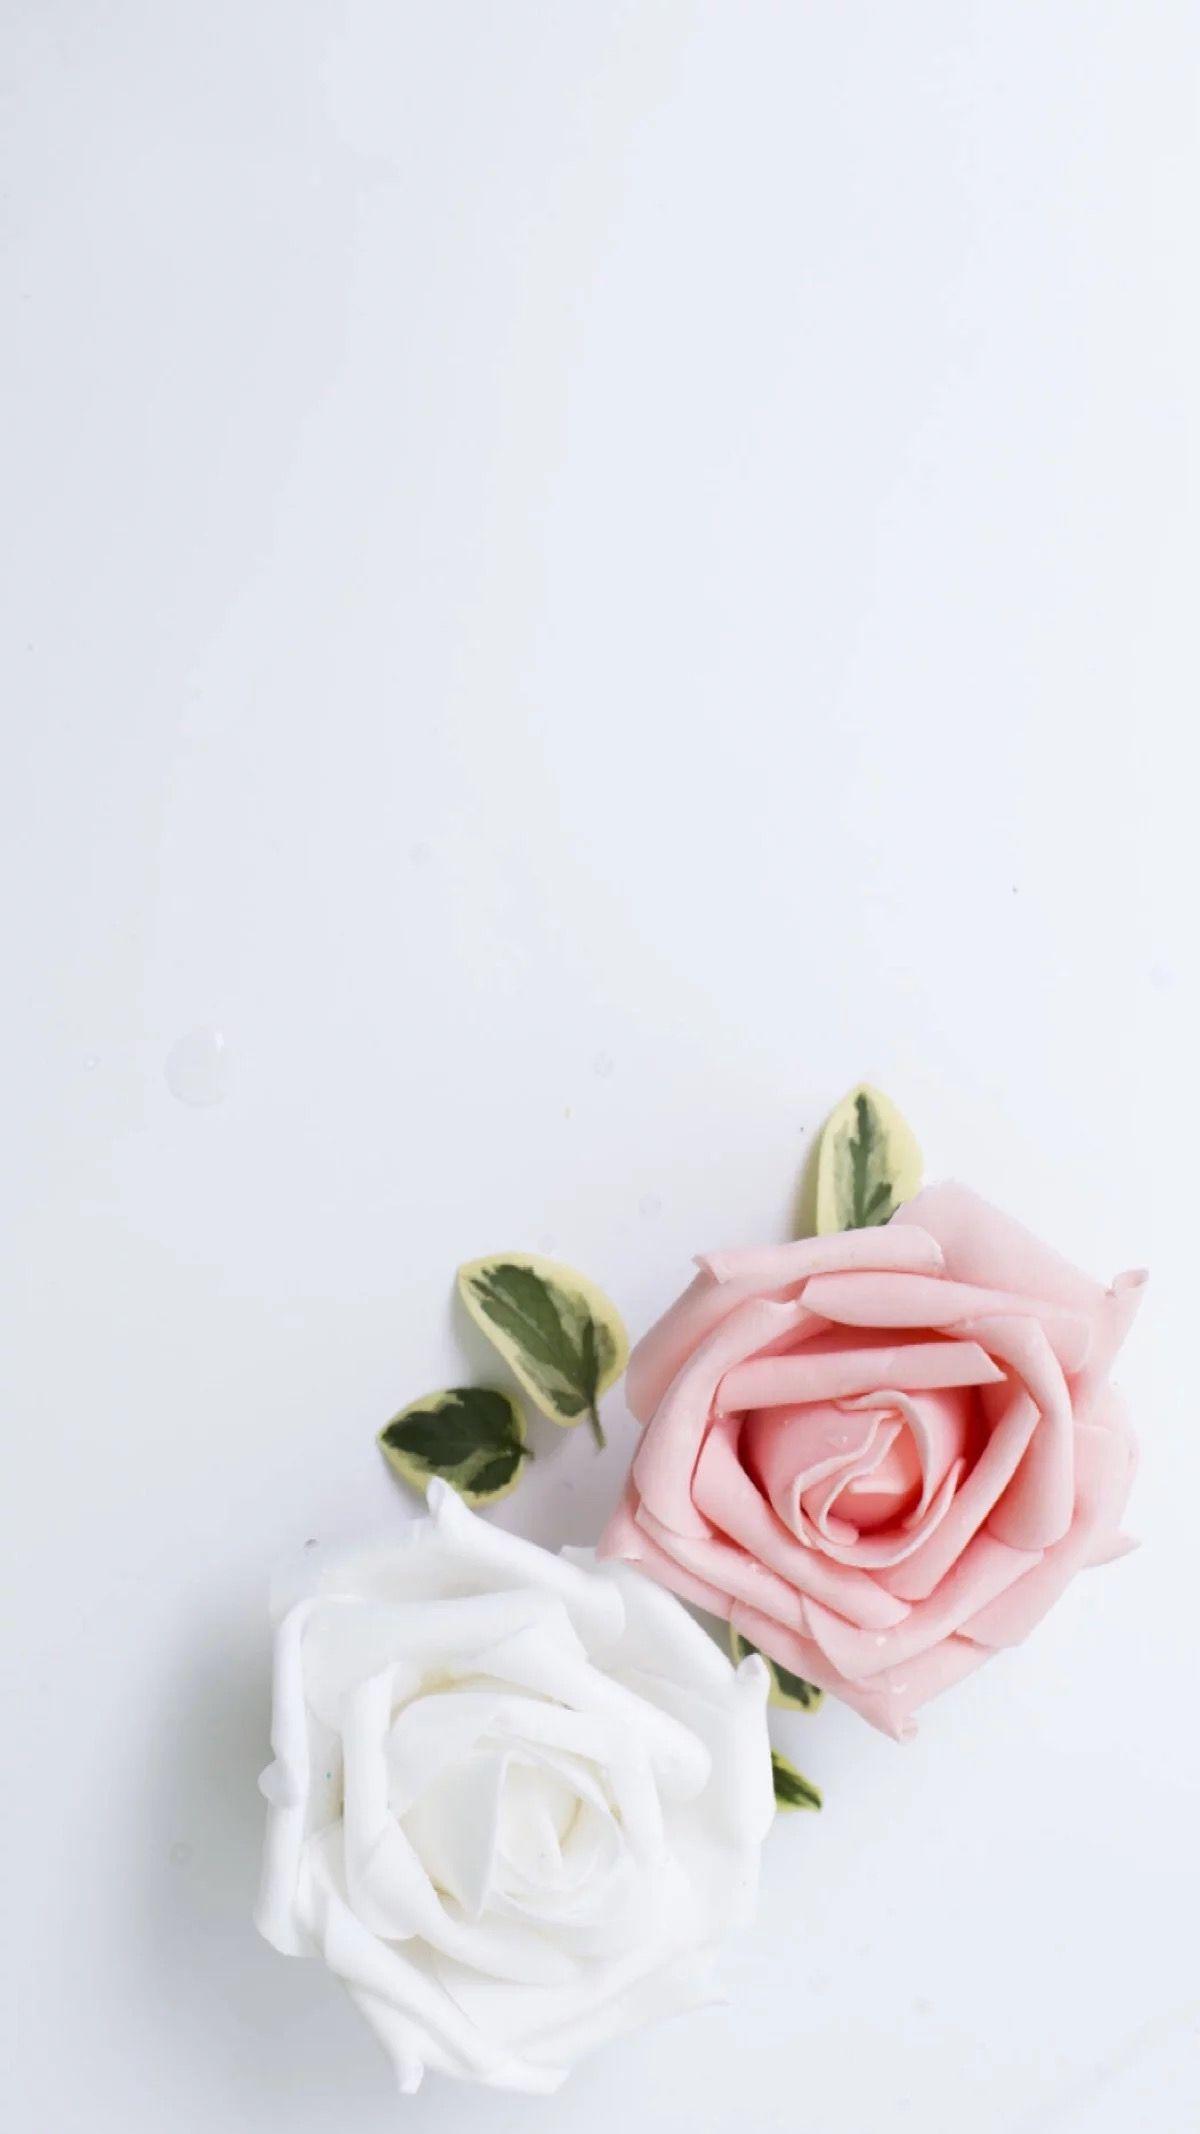 Pink And White Flower Wallpapers